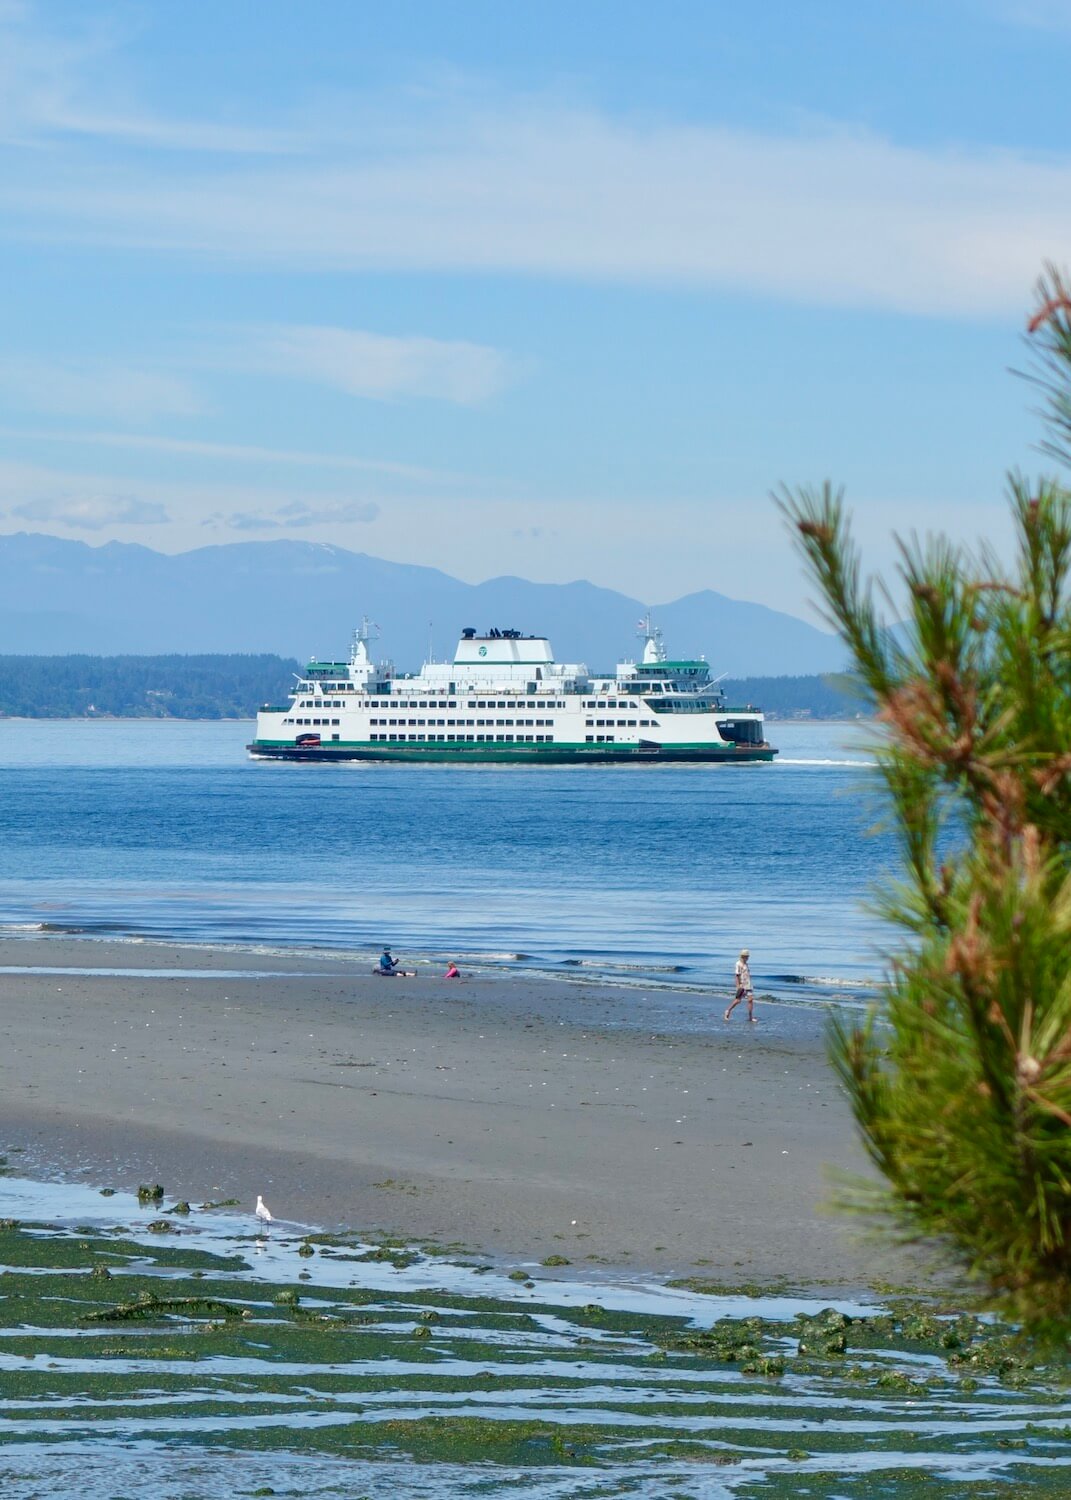 A Washington State ferry makes its way across the blue salish sea while the low tide in the foreground reveals green seaweed and open sandy beaches with people walking.  